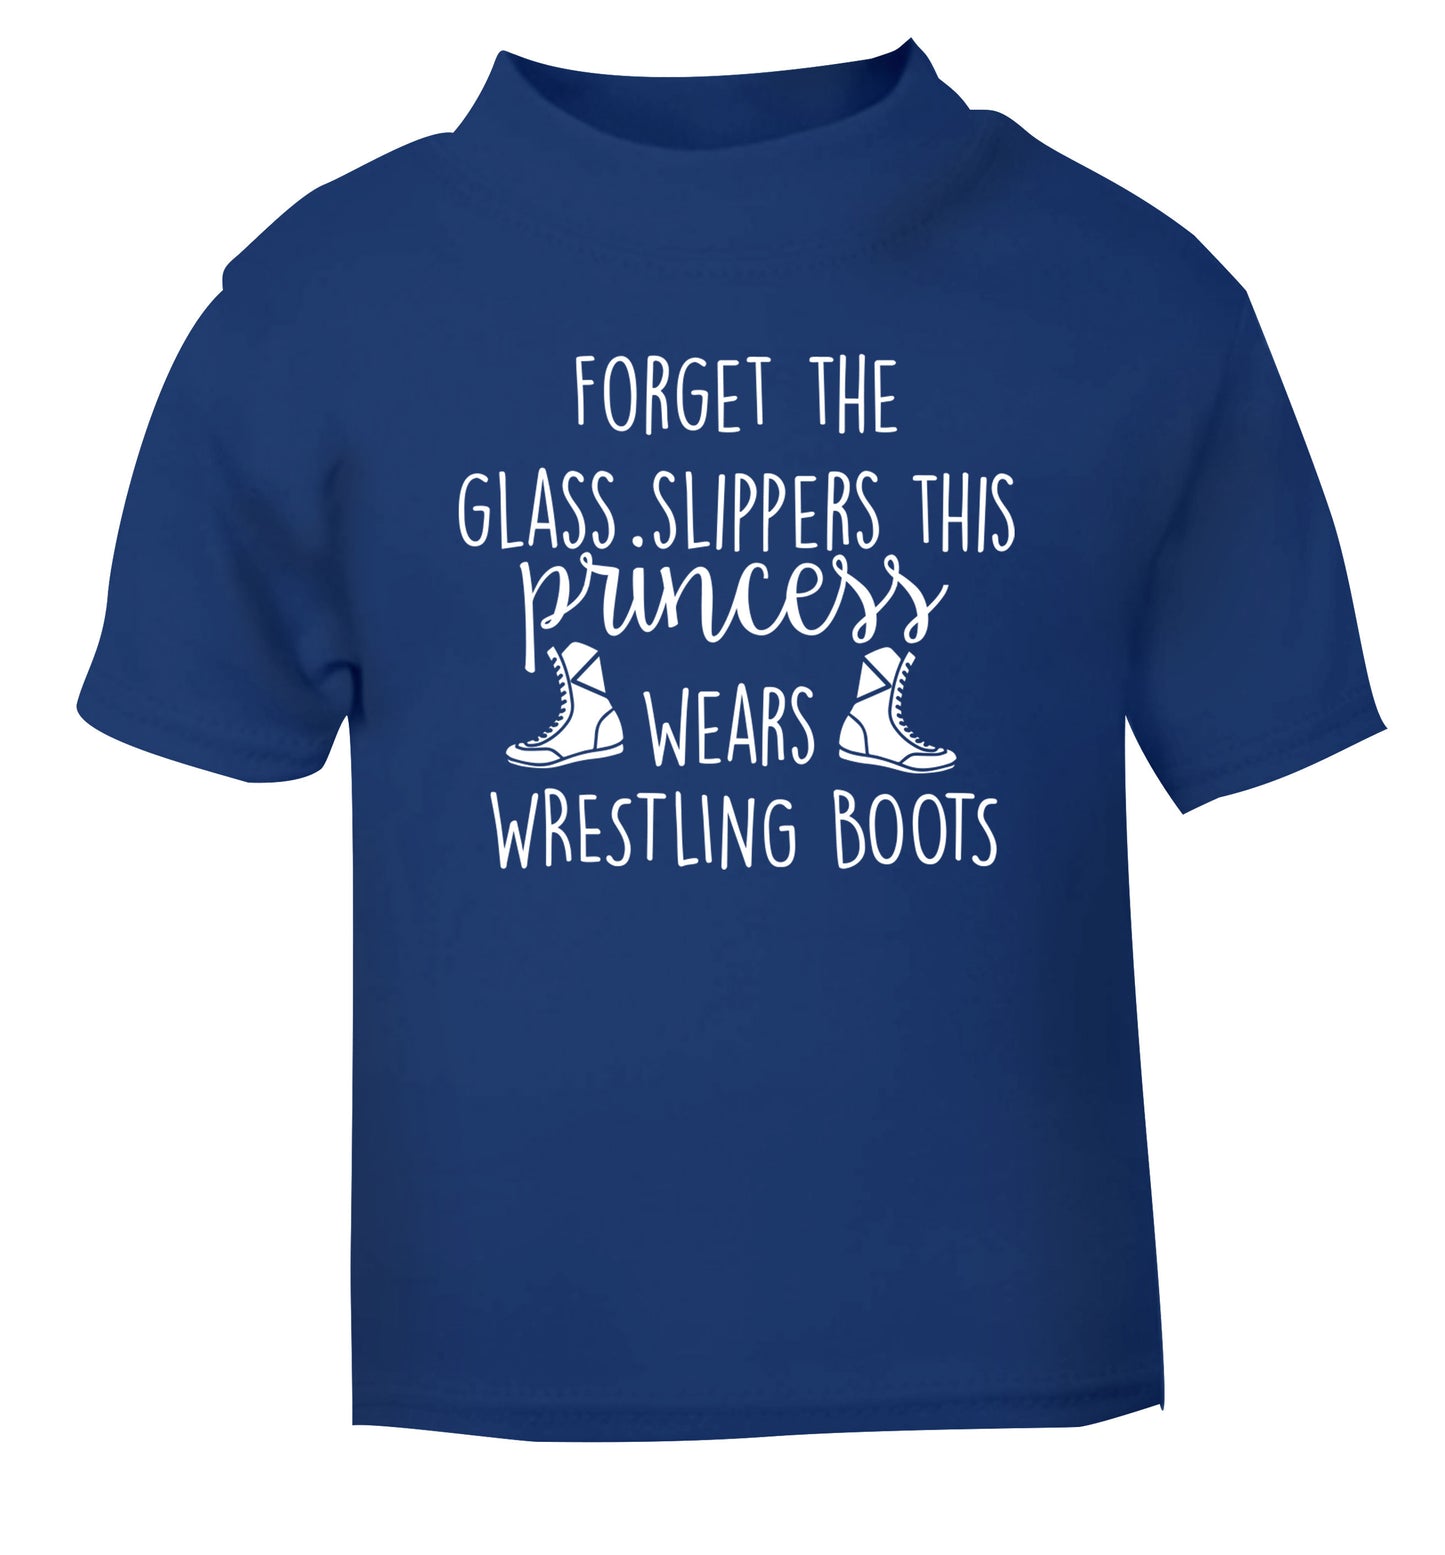 Forget the glass slippers this princess wears wrestling boots blue Baby Toddler Tshirt 2 Years